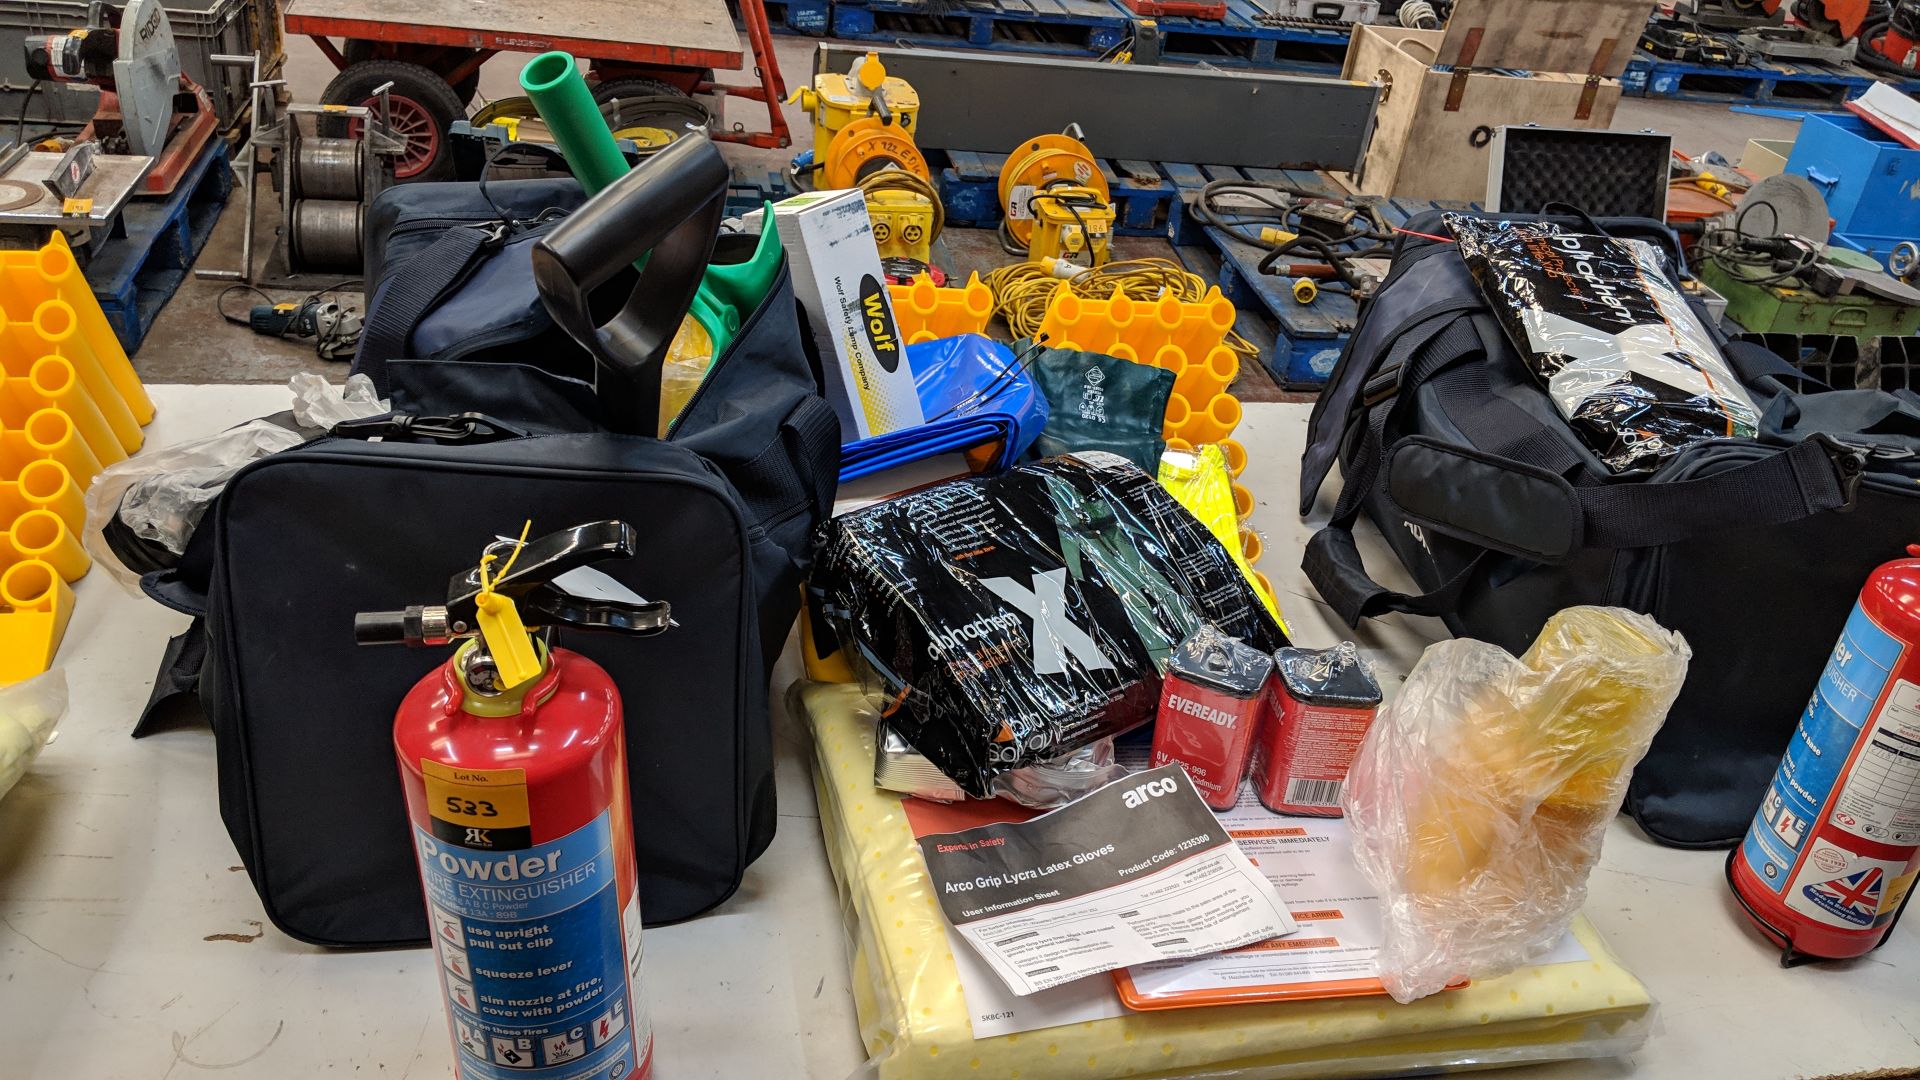 Vehicle disaster kit comprising bag with wide variety of emergency equipment plus fire extinguisher, - Image 14 of 14